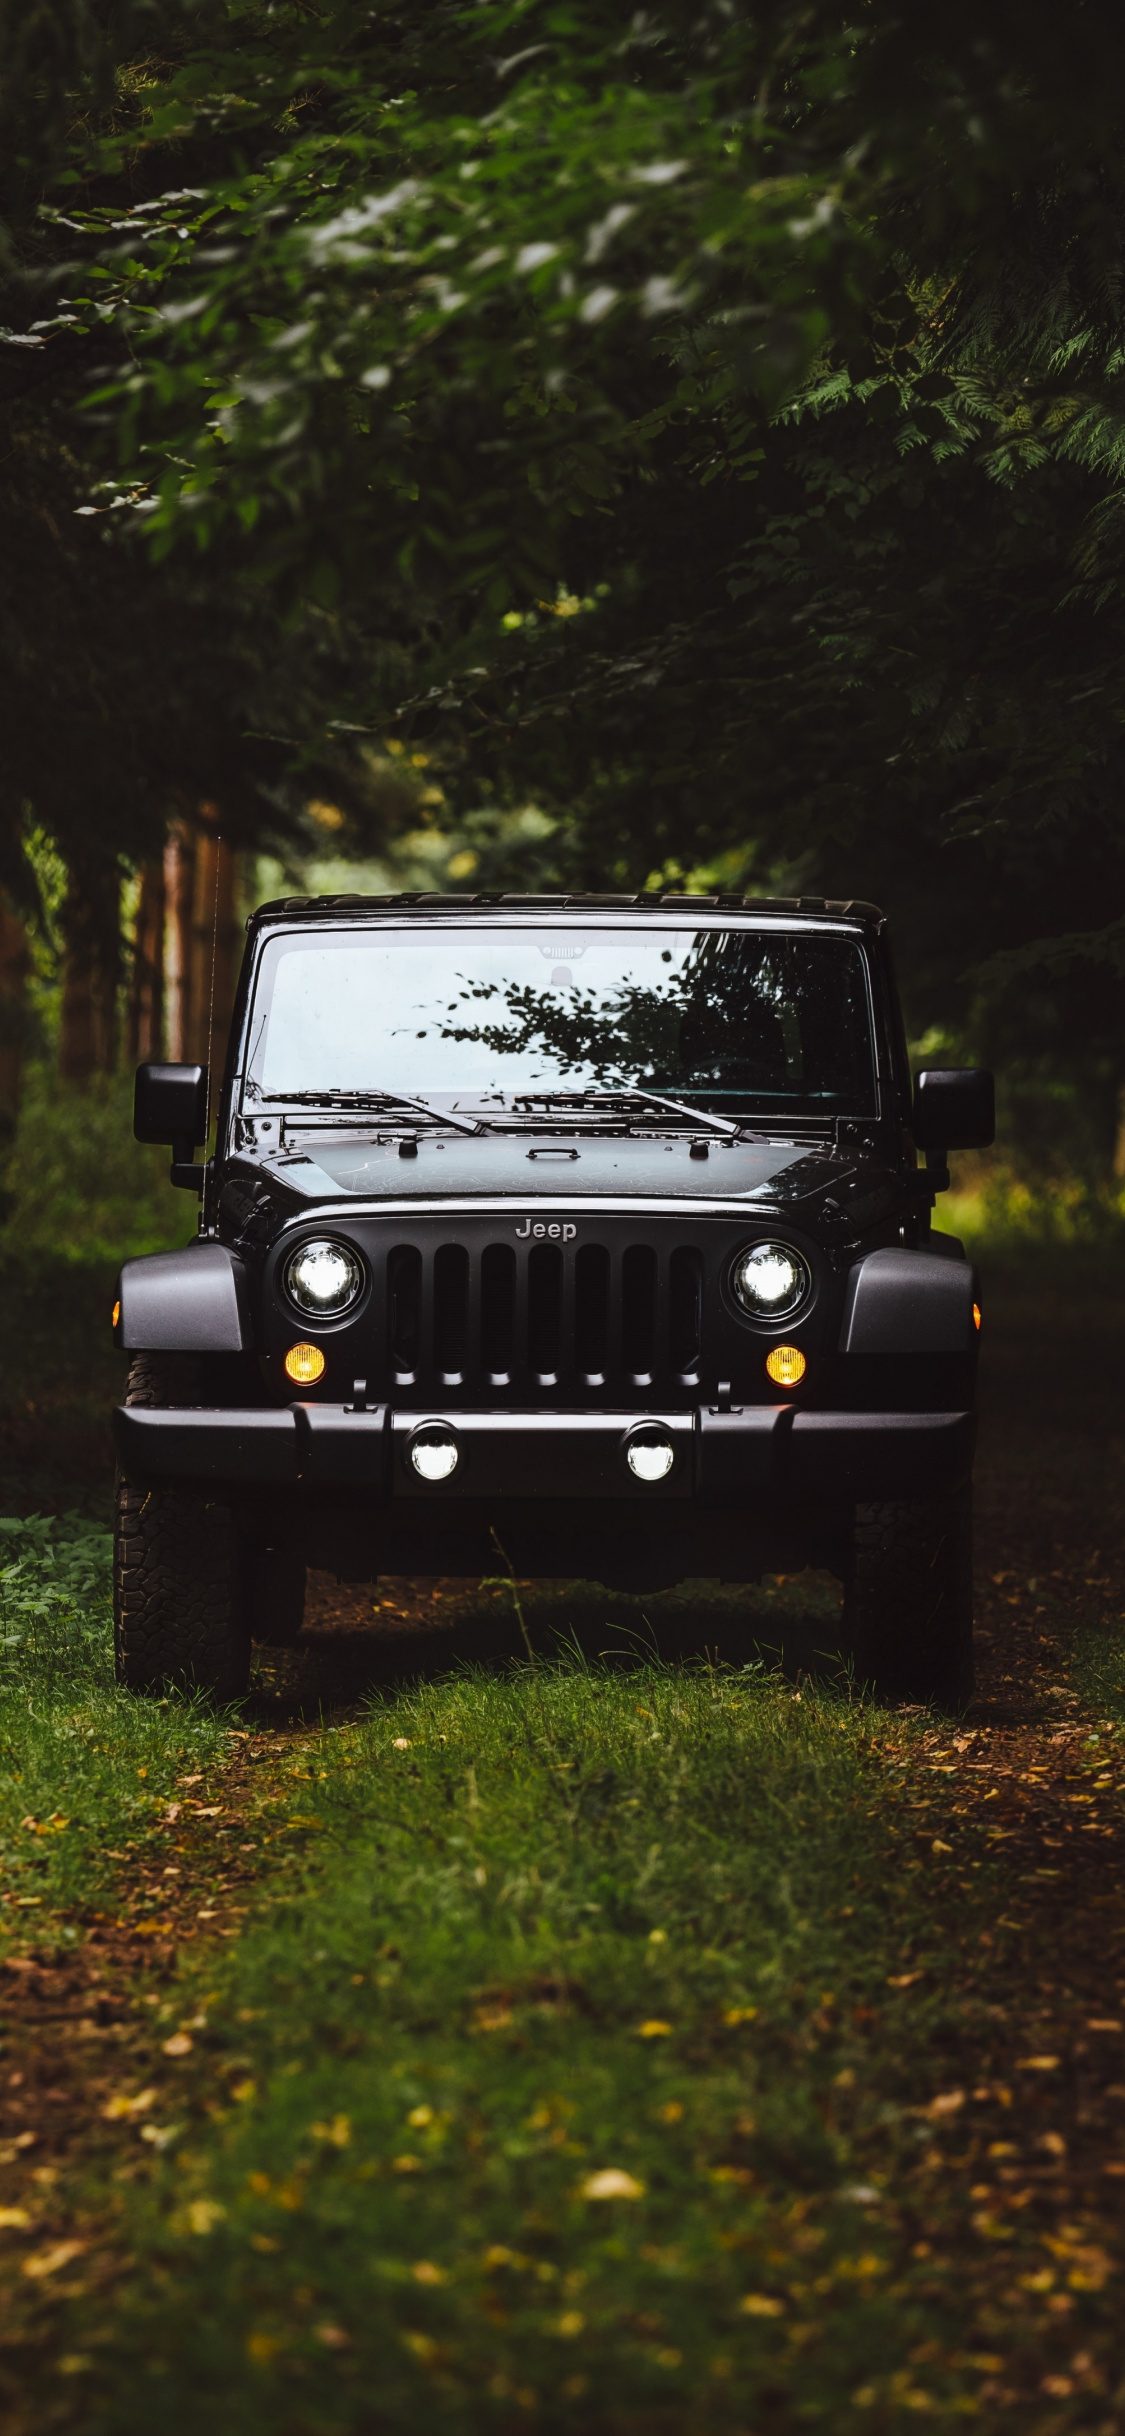 1125x2436 Download 1125x2436 Wallpaper Black Jeep Forest Jeep Wrangler Iphone X 1125x2436 Hd Image Background 2165